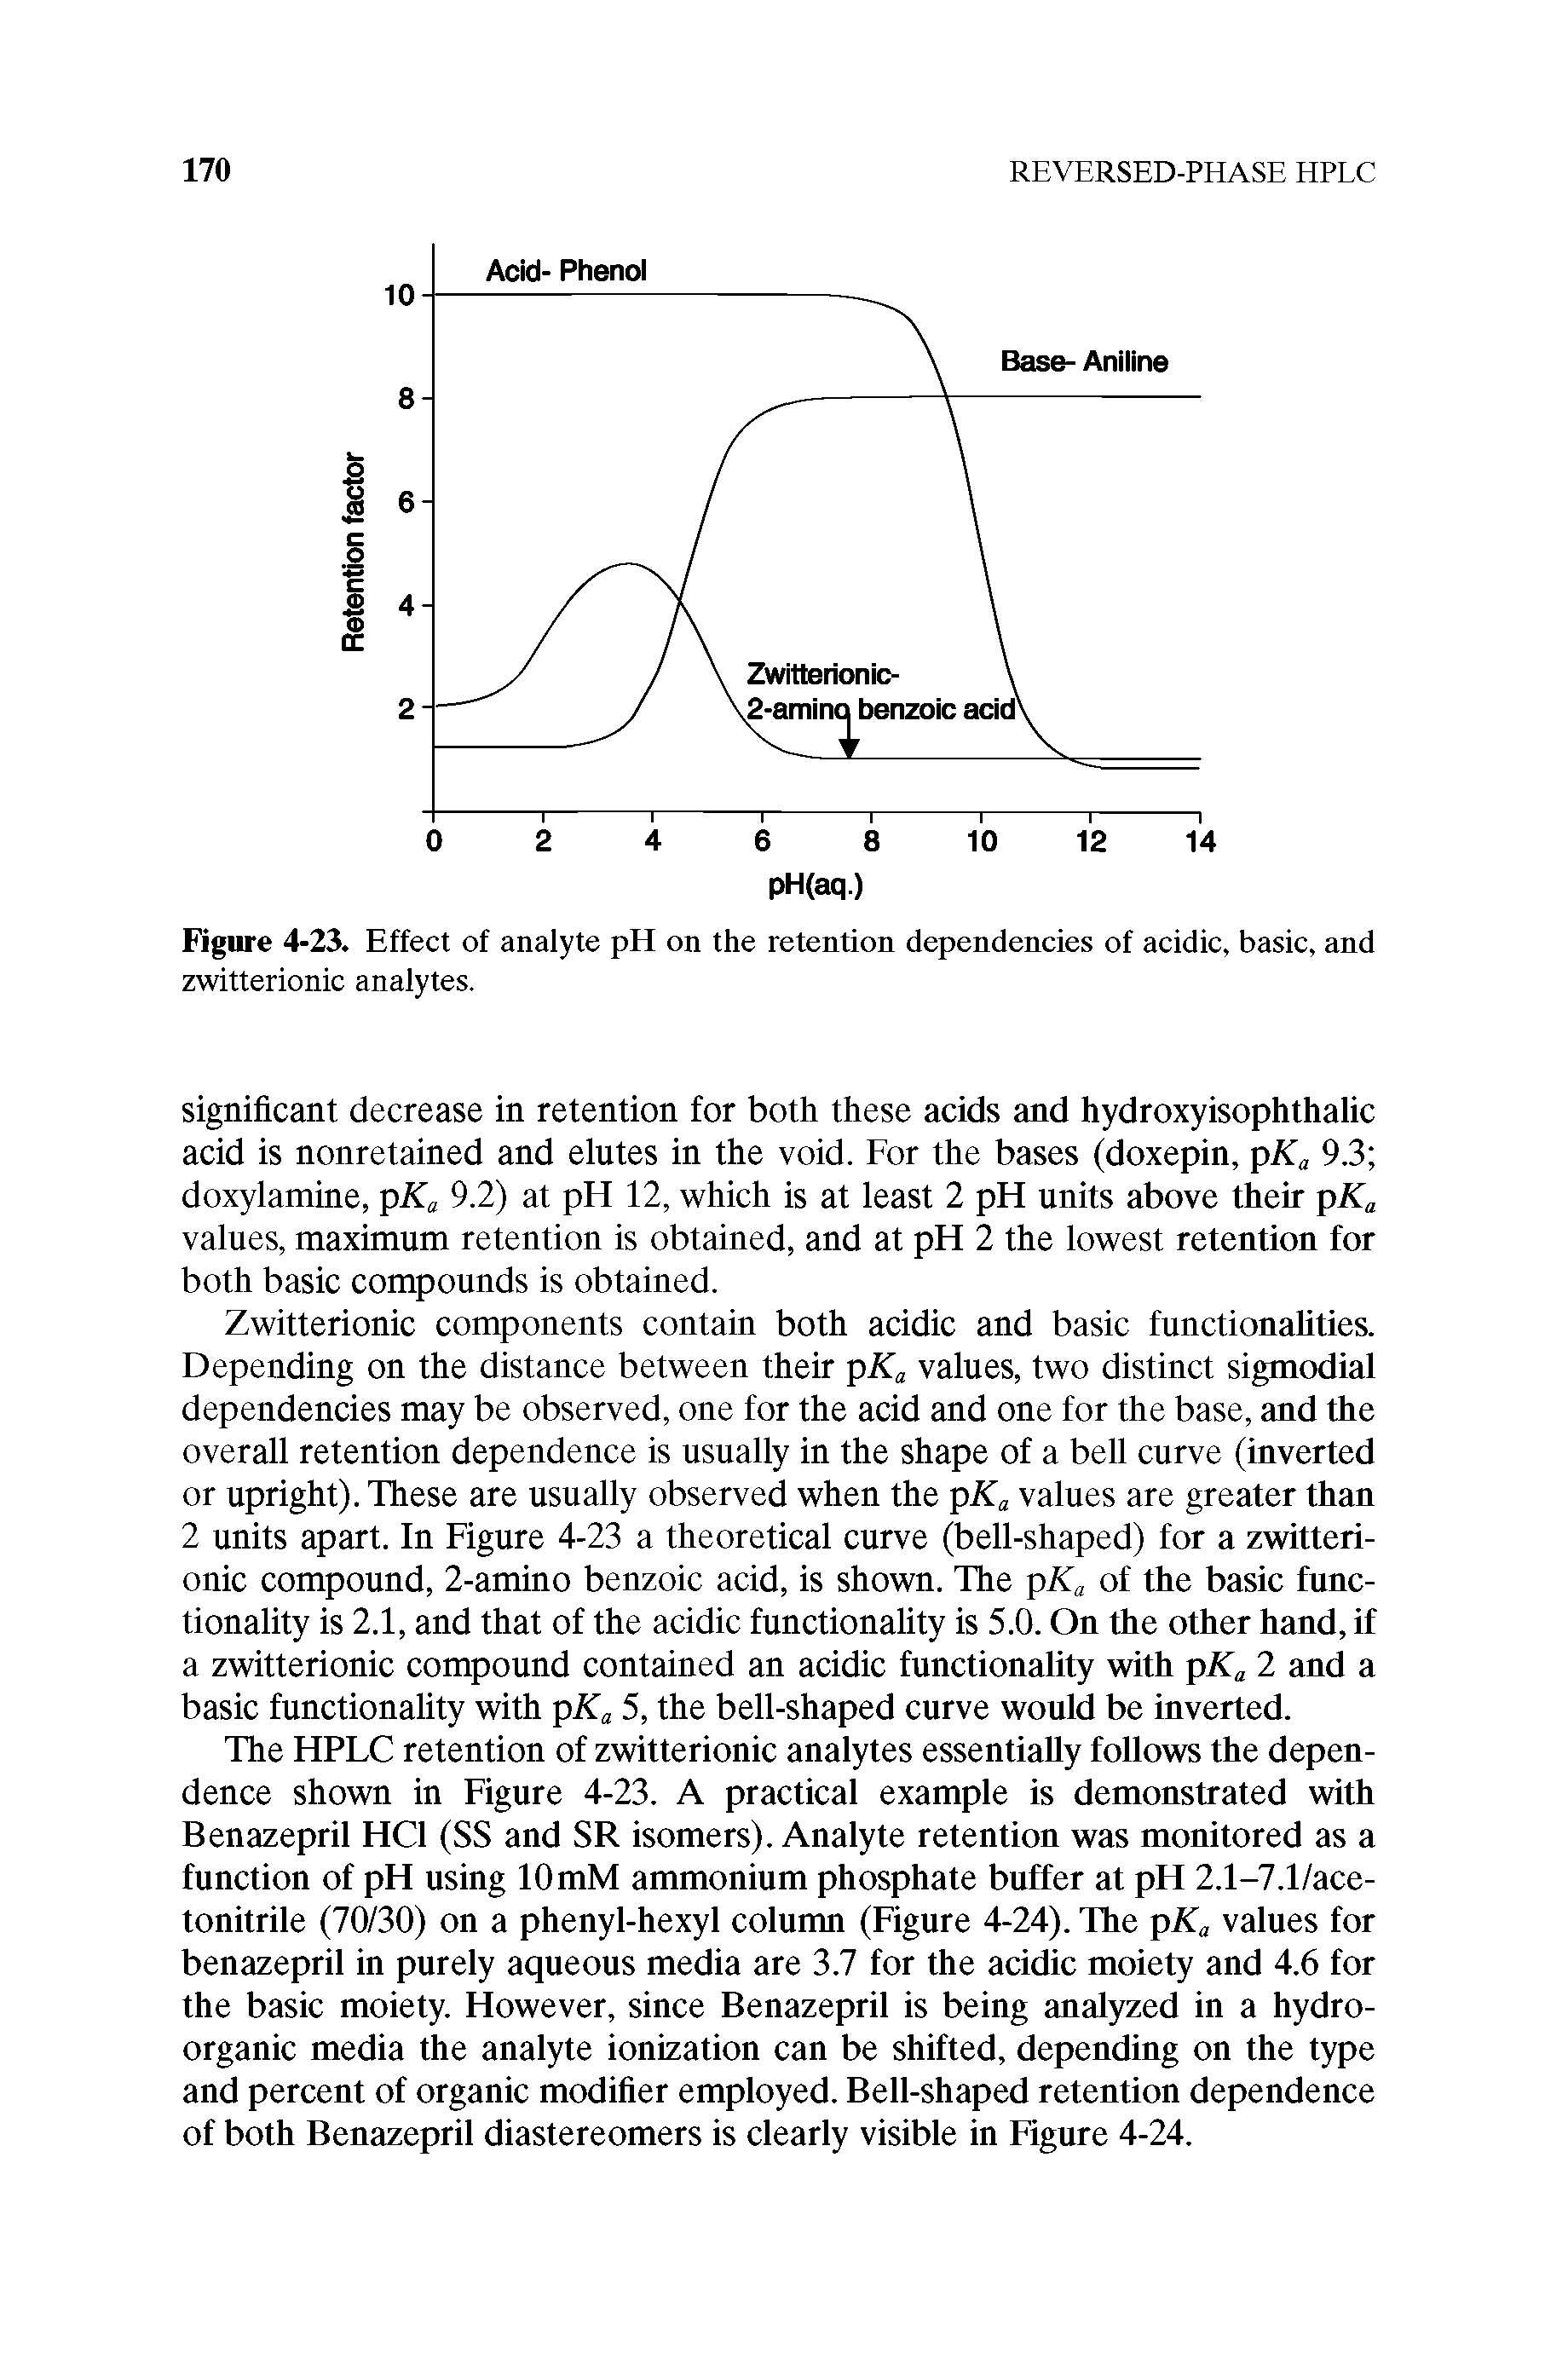 Figure 4-23. Effect of analyte pH on the retention dependencies of acidic, basic, and zwitterionic analytes.